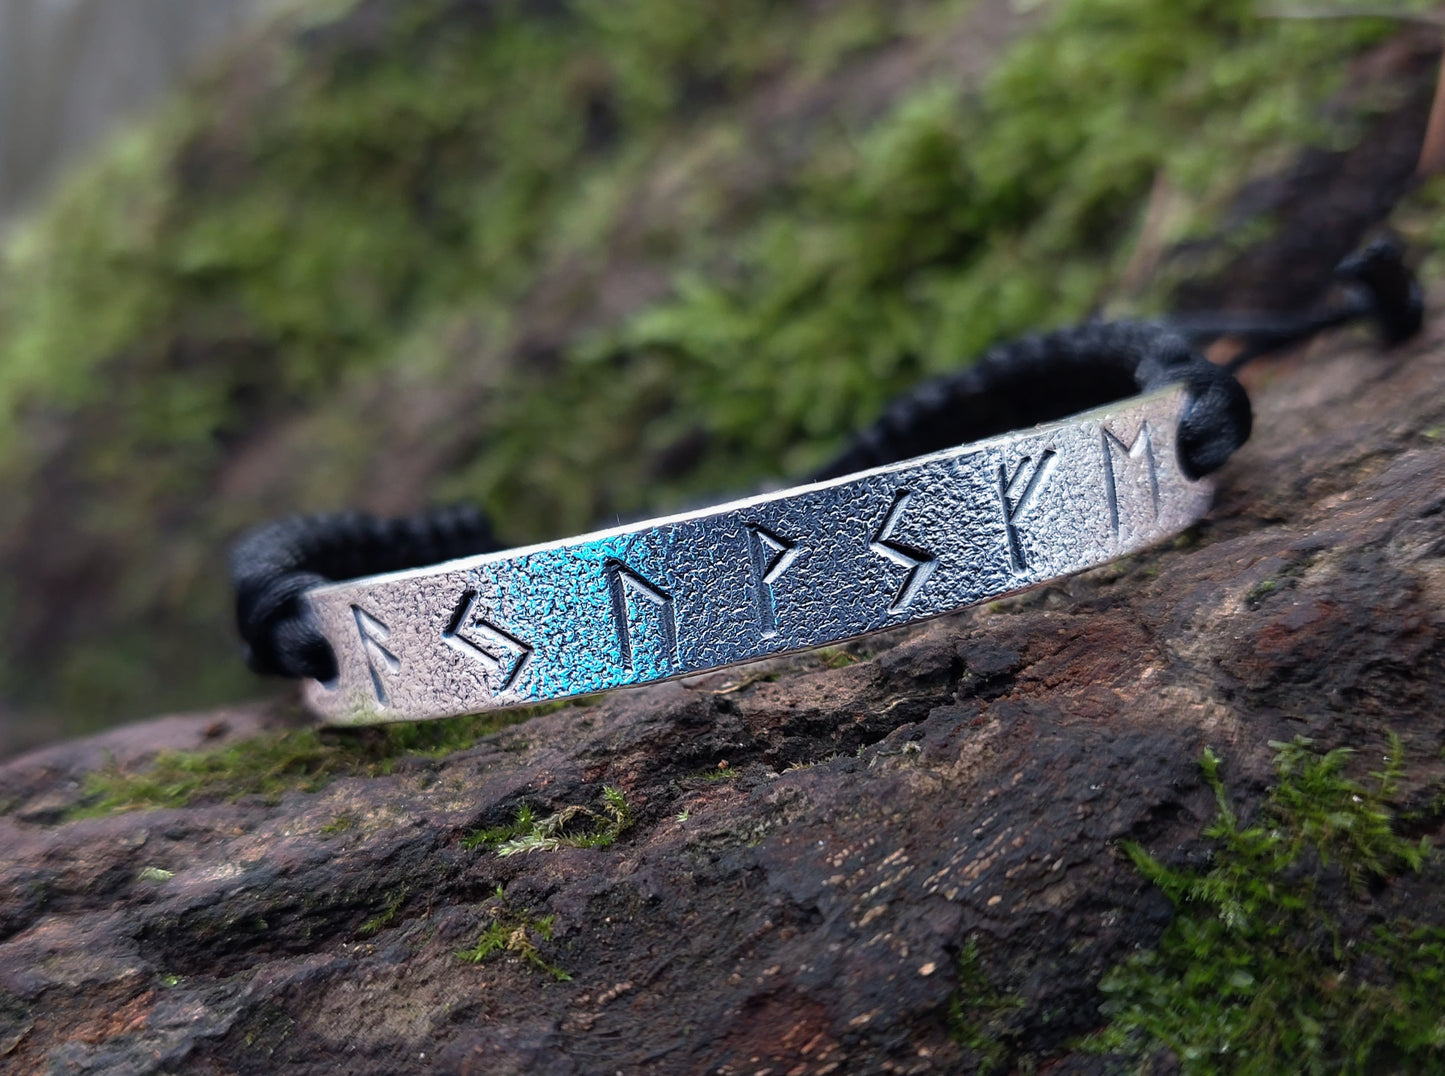 Enchanted sterling Silver Viking wealth, money and prosperity amulet bracelet. Real amulet charm with celtic wealth runes formula